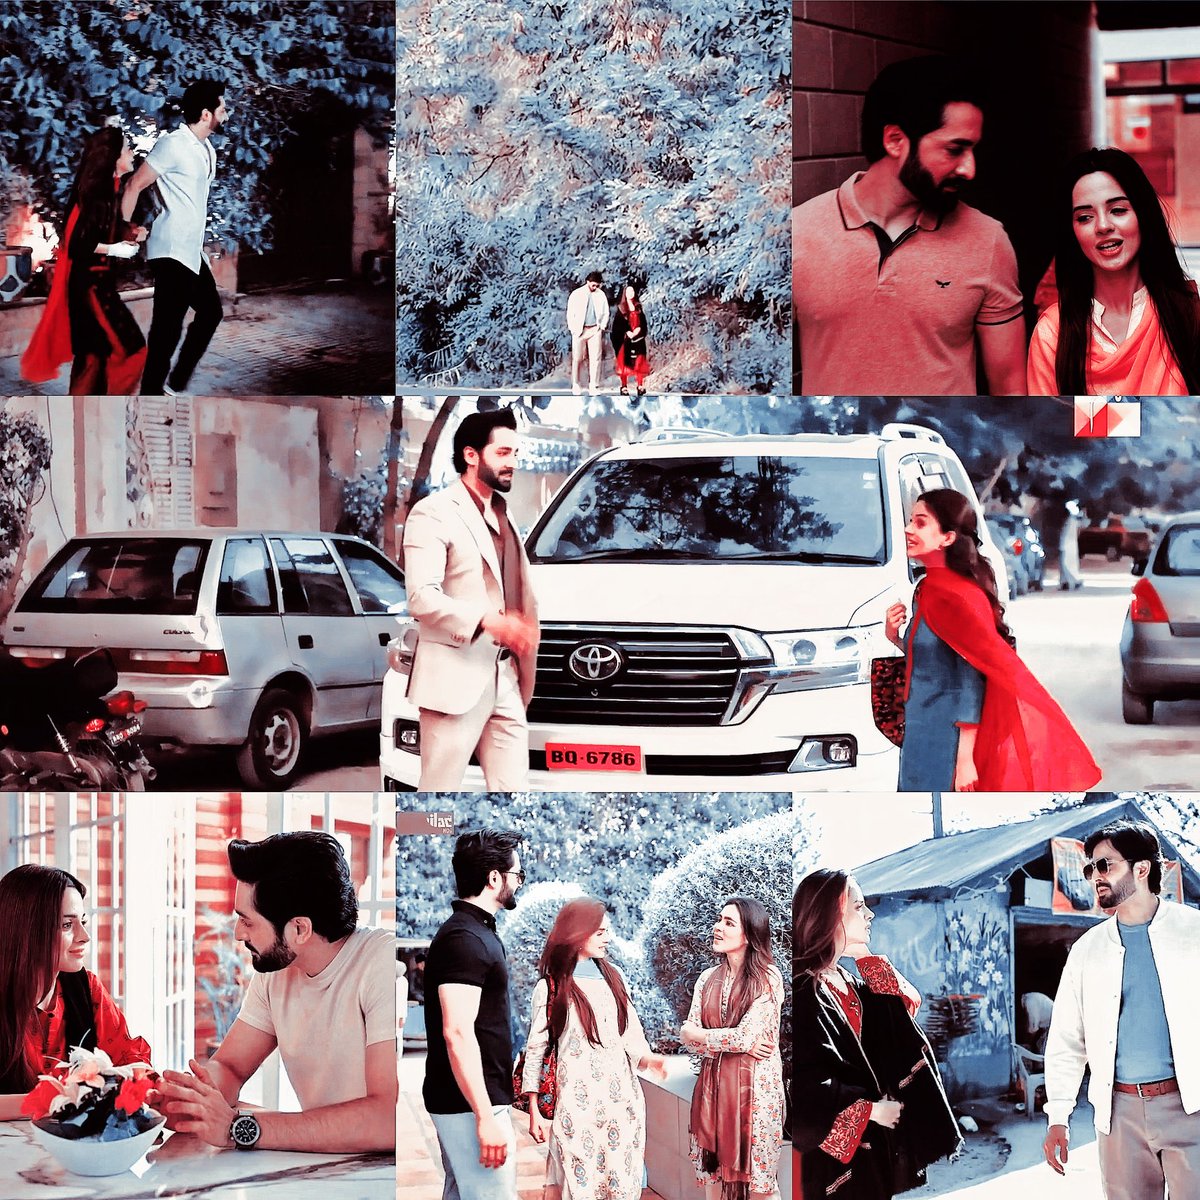 shabrez and meher love story is so beautiful not just because their unique first meeting,but because they spent a time together as best friends,lovers.they became soulmates
No matter what happens,they will  back together again ..🤍
#RaheJunoon #DanishTaimoor